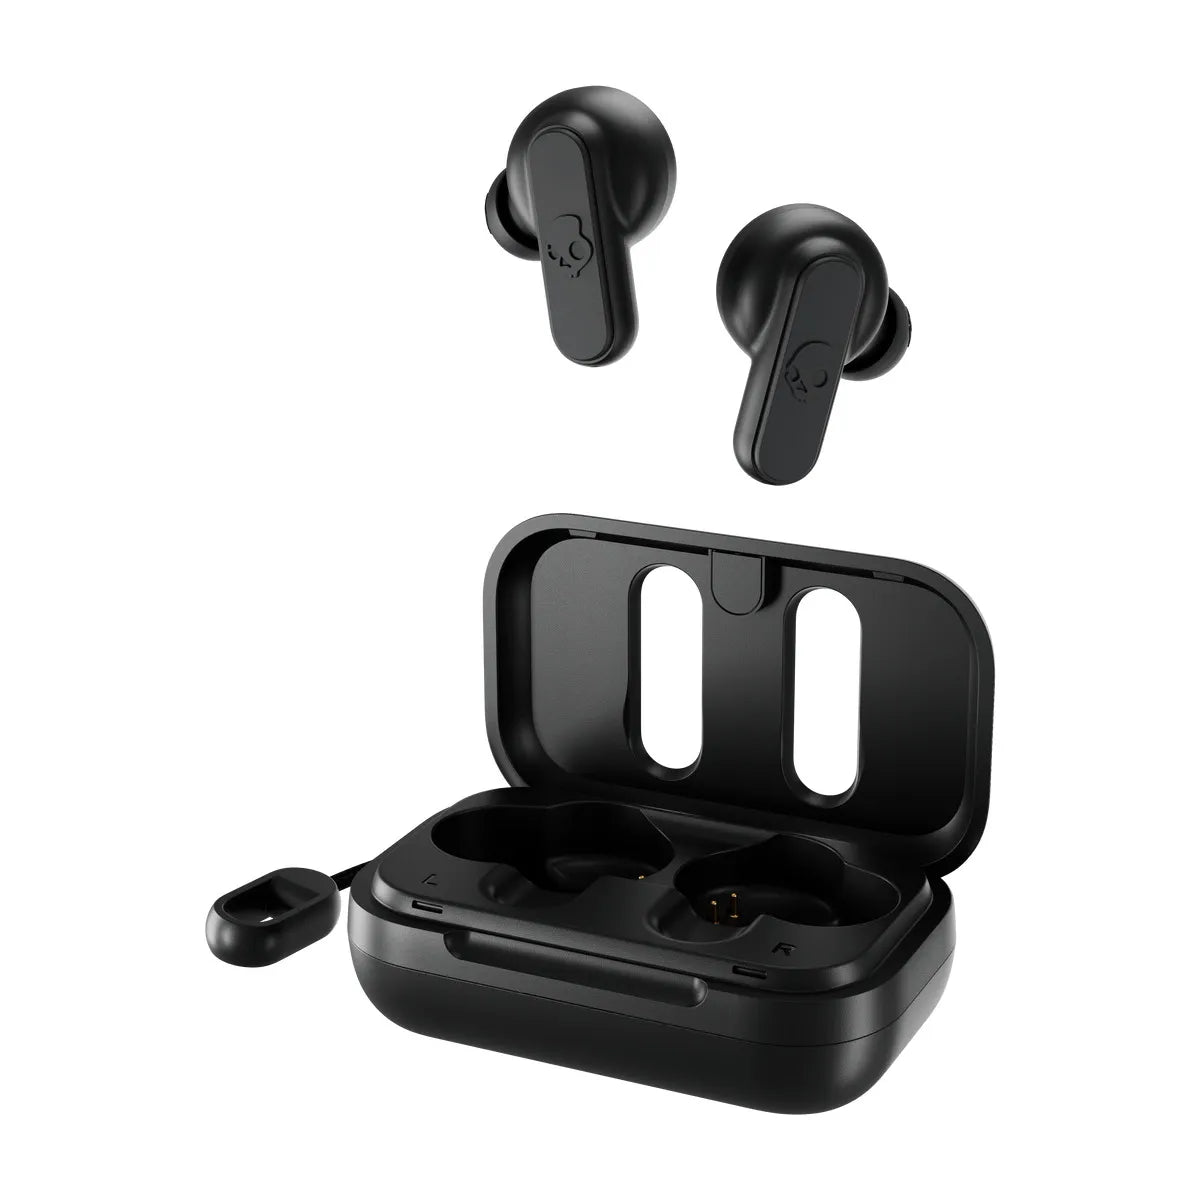 Skullcandy Dime True Wireless Earbuds With 12 Hours Total Battery